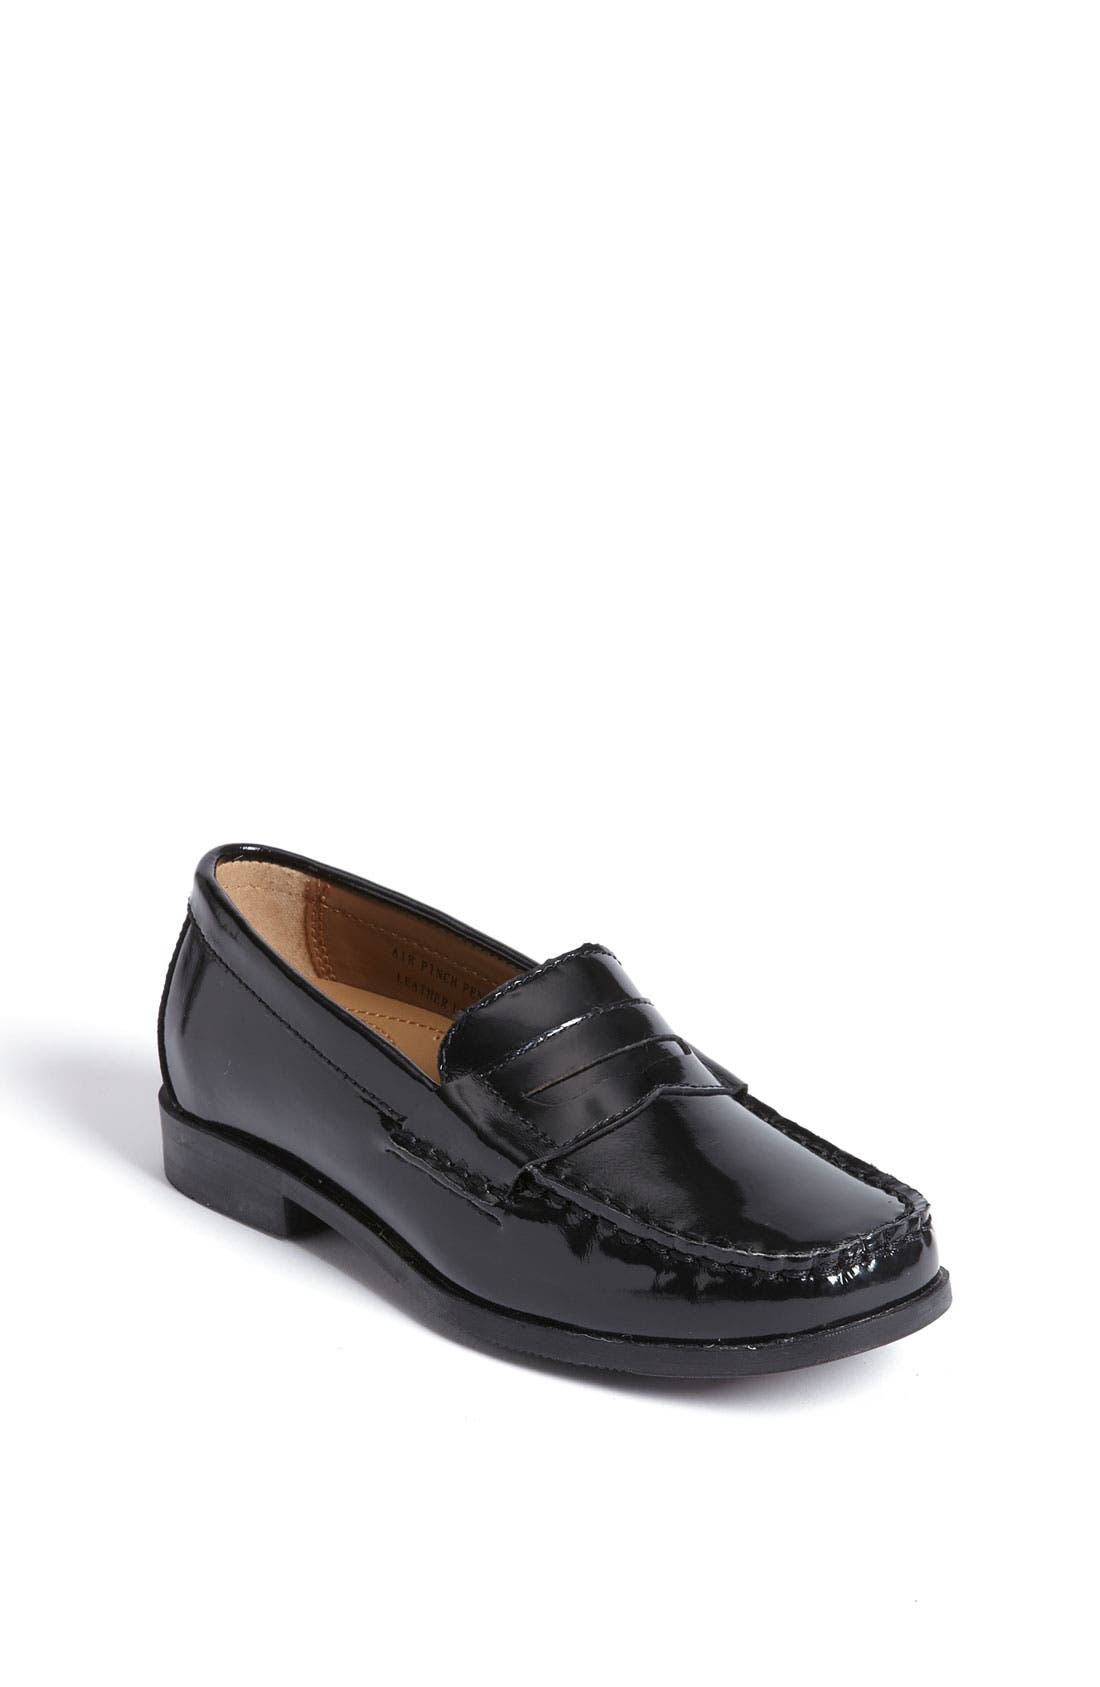 Cole Haan 'Air Pinch' Penny Loafer 